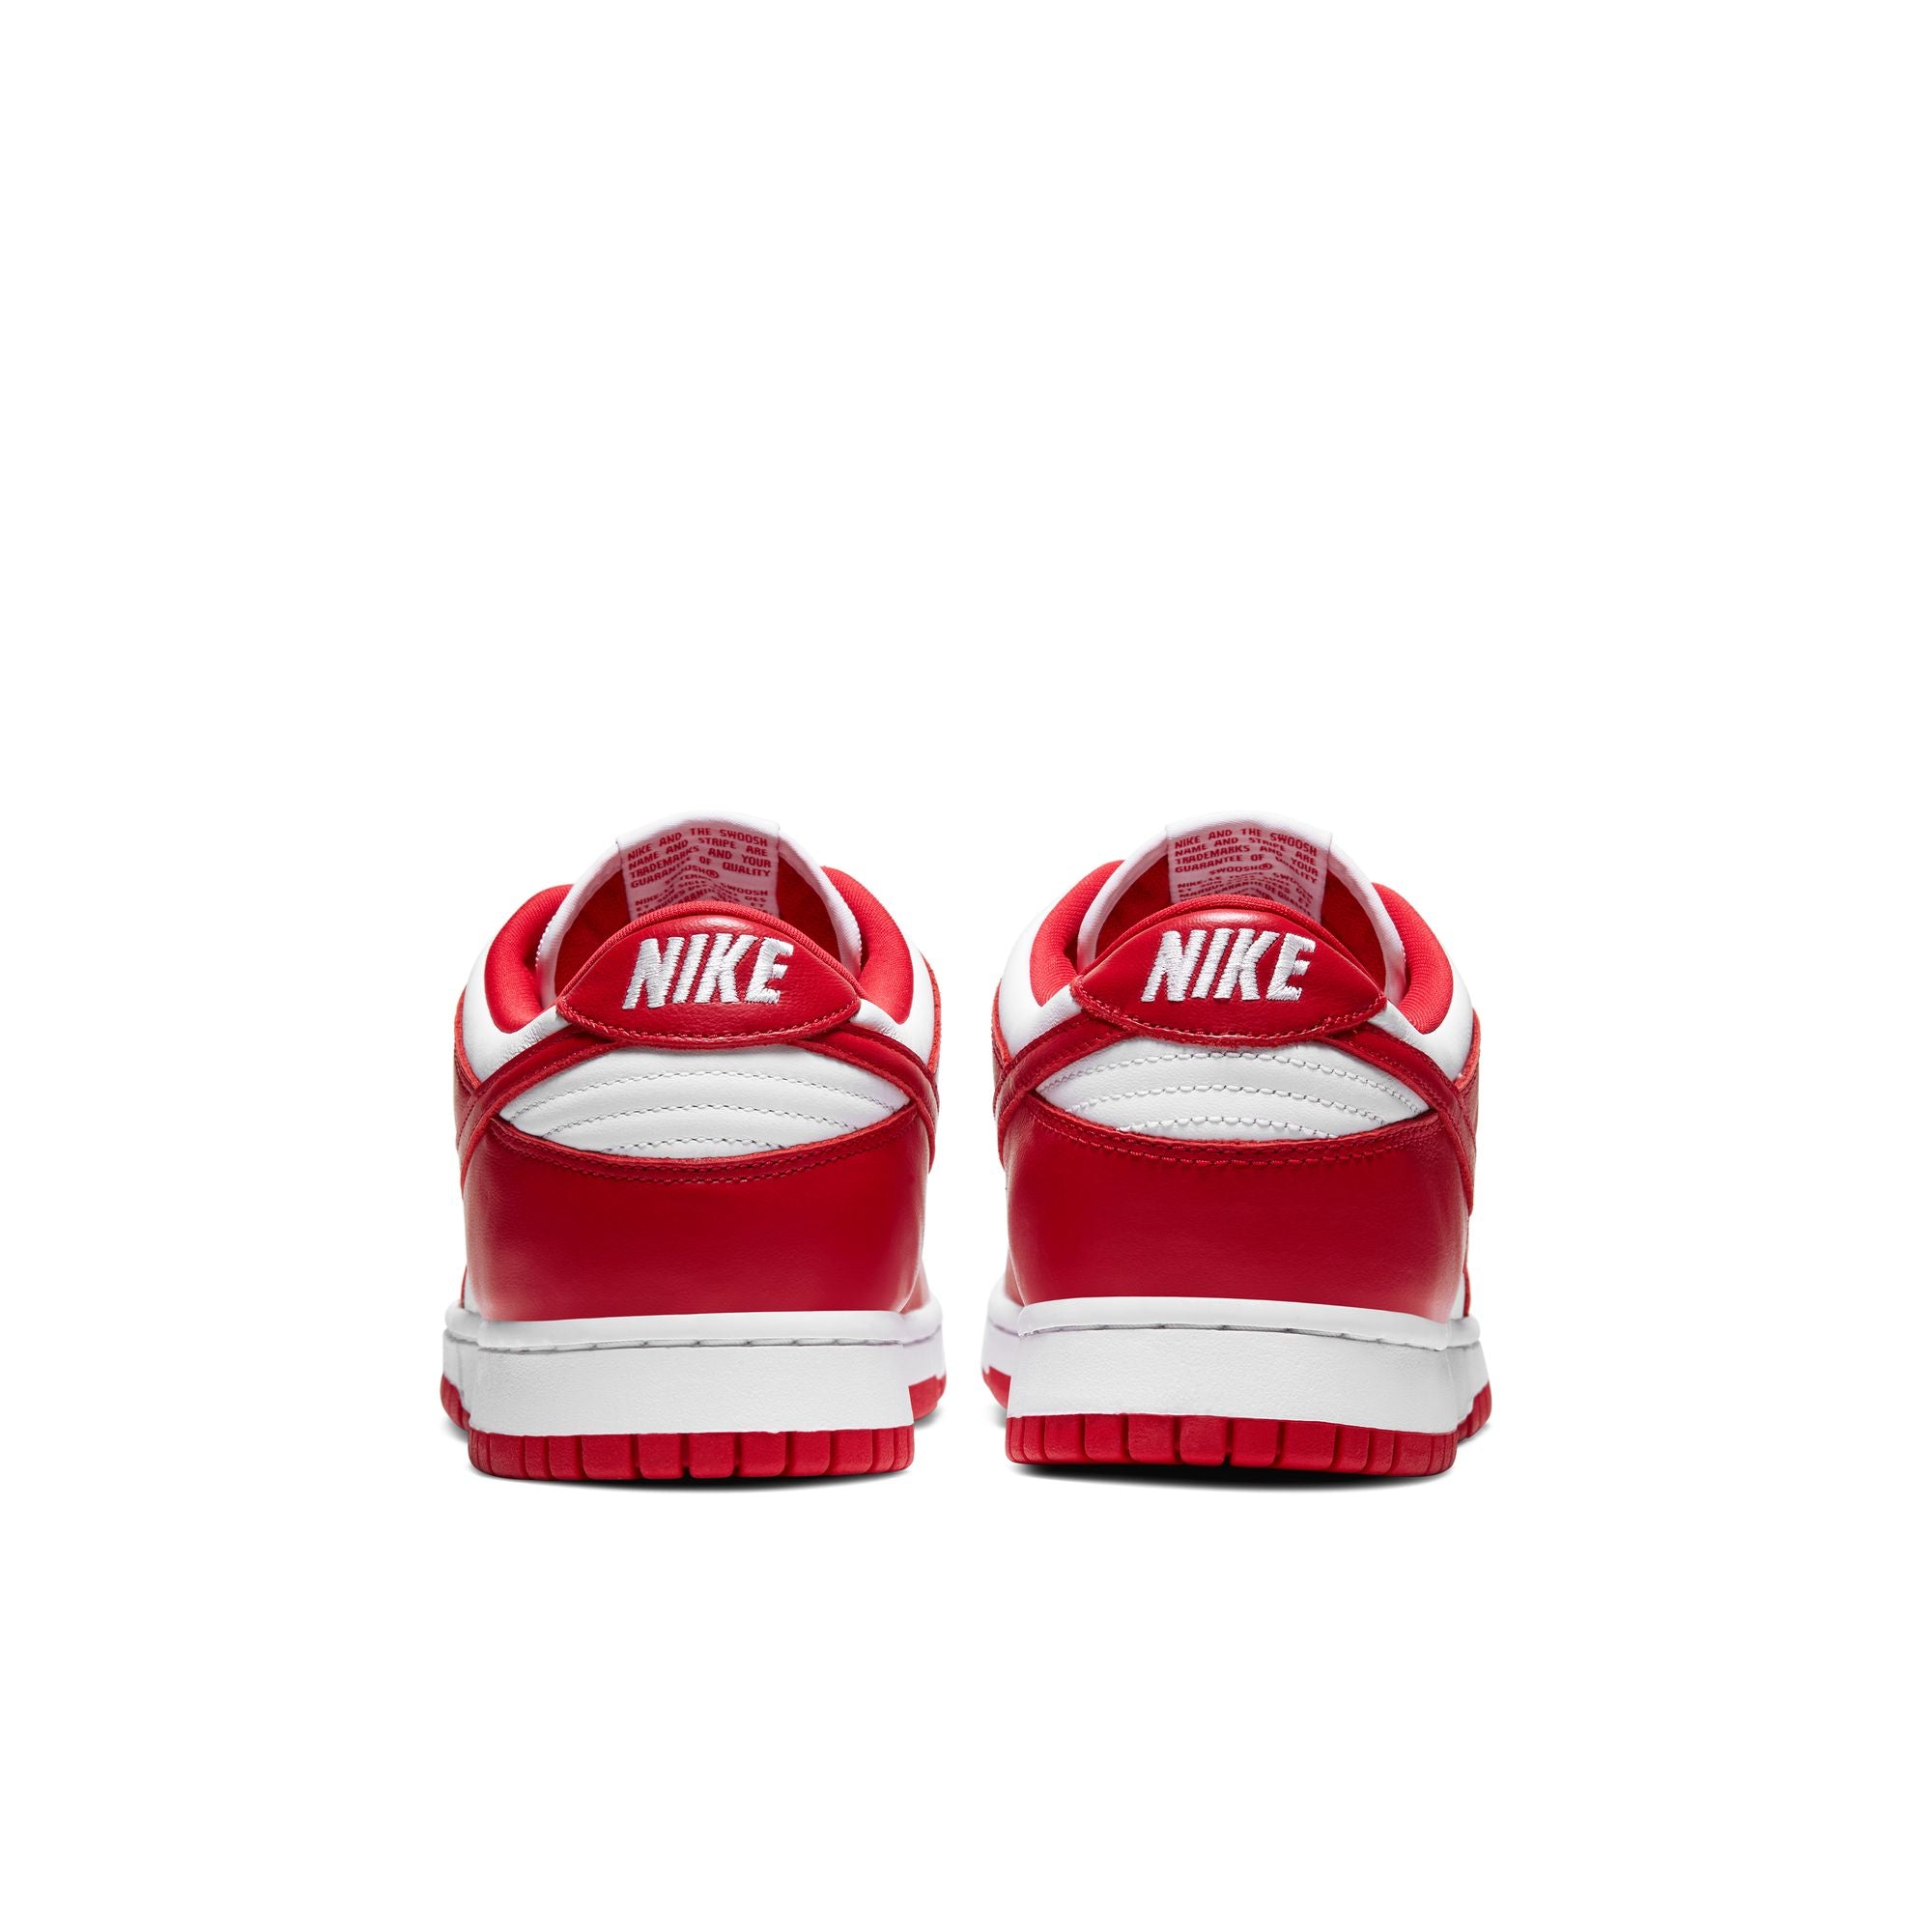 NIKE - Nike Dunk Low Sp - (White/University Red) view 3